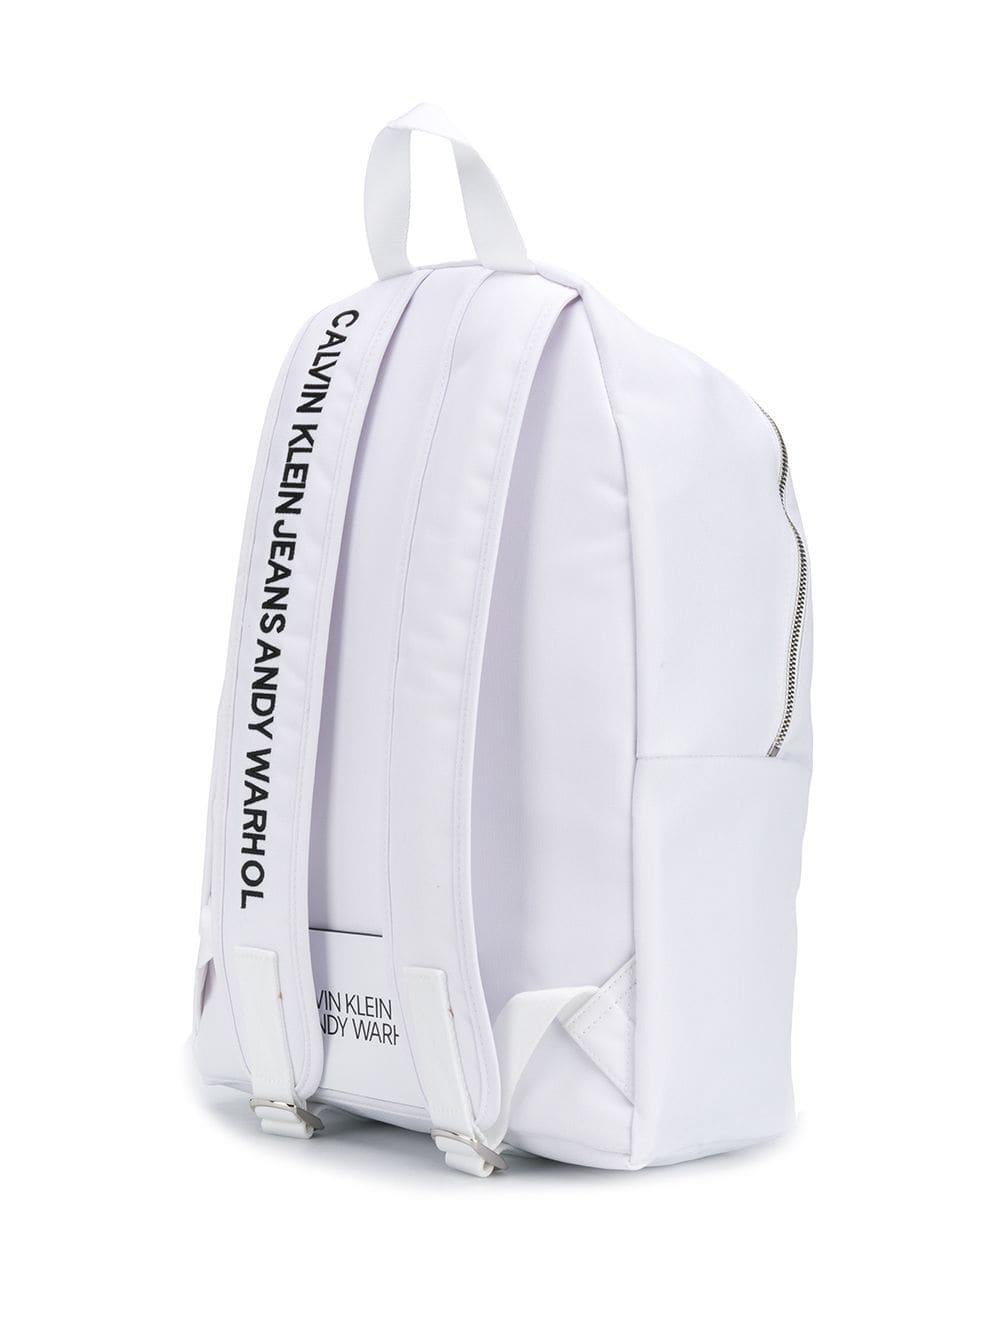 Calvin Klein Andy Warhol Photo Art Backpack in White | Lyst UK